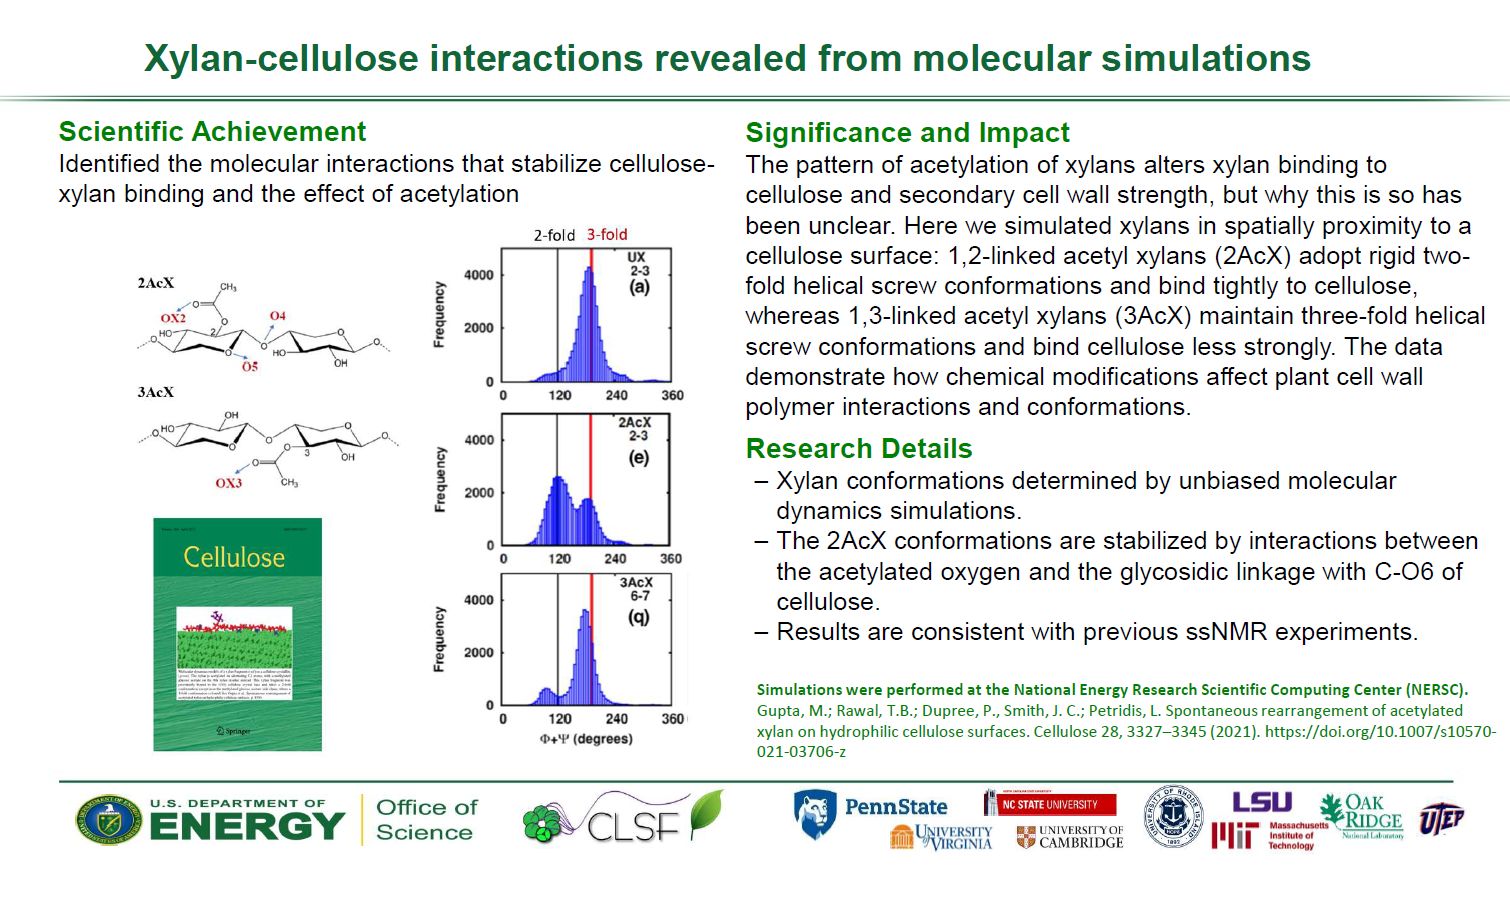 CLSF collaborative research from Petridis and Dupree of simulated xylan-cellulose interactions